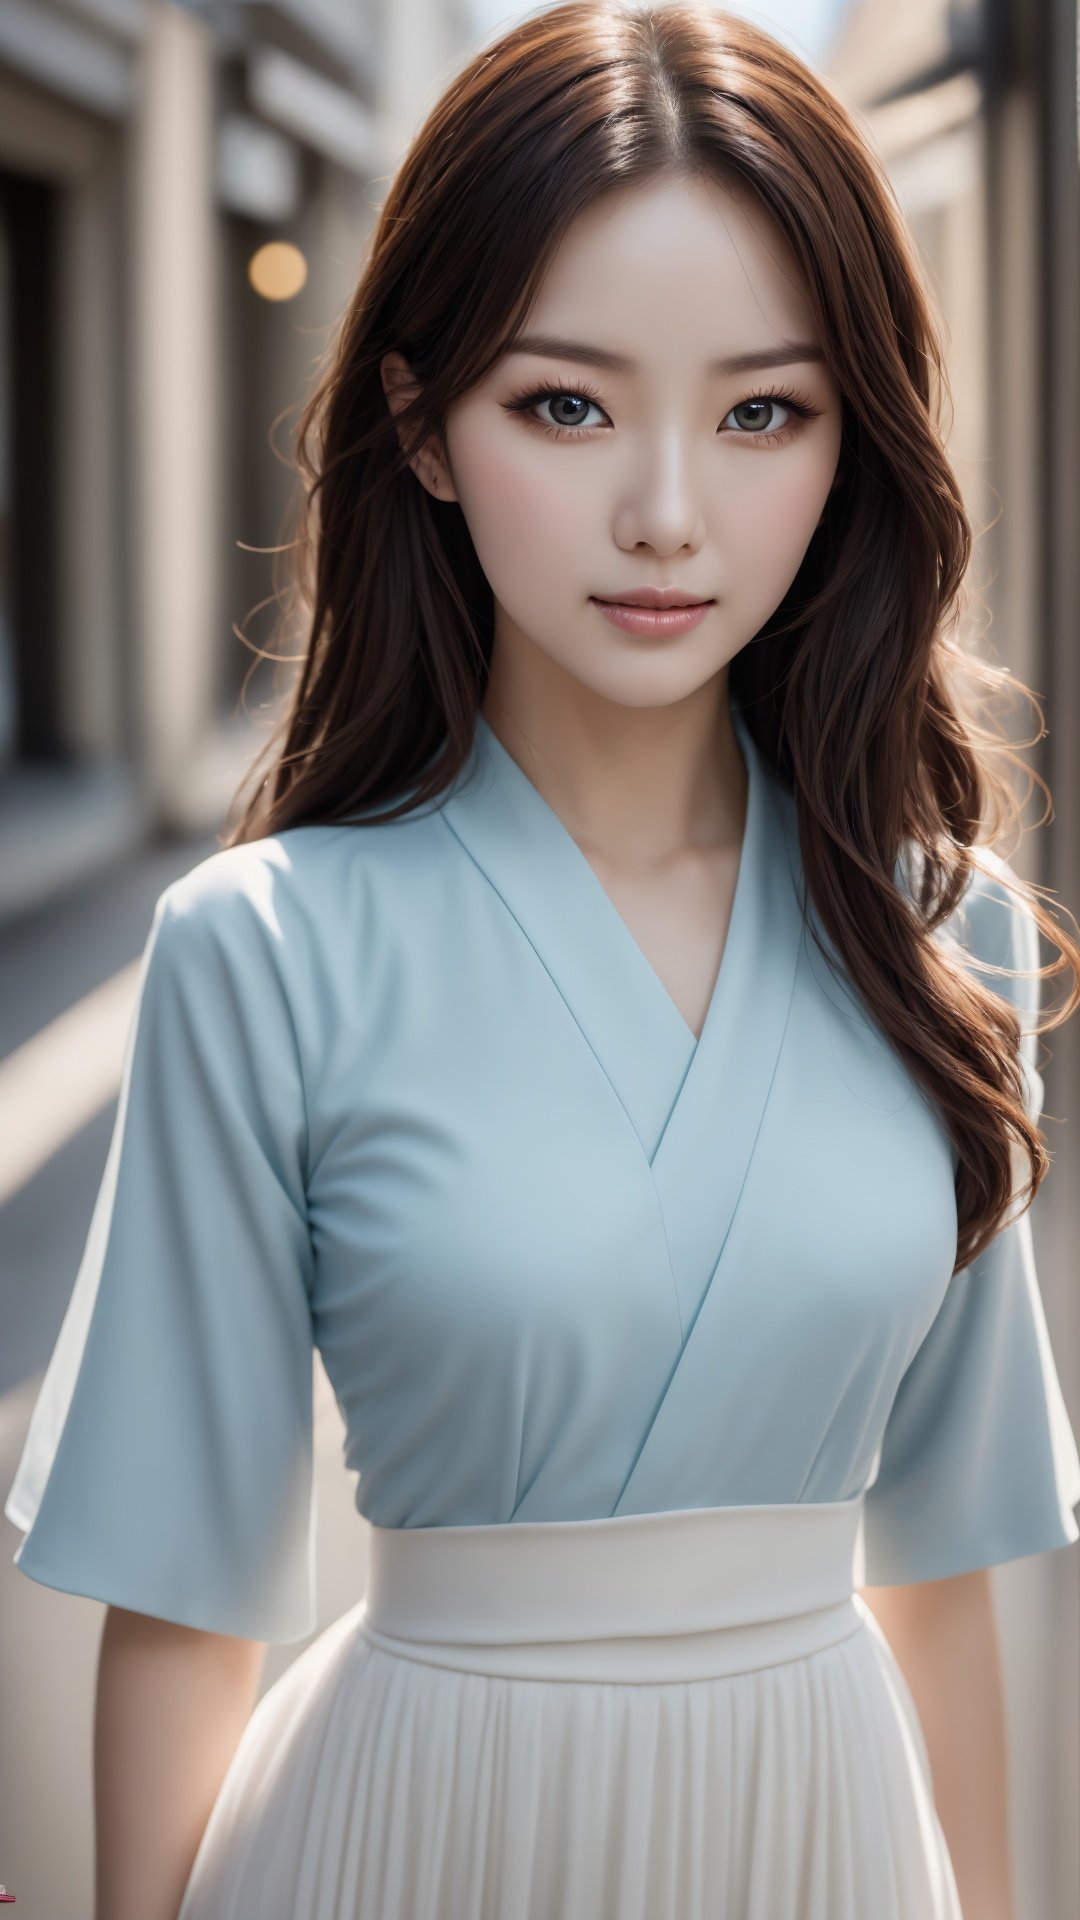 best quality,4k,8k,highres,masterpiece:1.2,ultra-detailed,realistic,photorealistic:1.37,portrait,Korean sexy woman,dark background,piercing eyes,sharp focus,soft lighting,vibrant colors,subtle makeup,long flowing hair,feminine curves,sensual pose,traditional hanbok,bold confidence,alluring gaze,modern interpretation,subtle elegance,graceful posture,understated beauty,delicate features,provocative charm,strong presence,confident smile,seductive aura,natural beauty,mesmerizing lips,intense expression,sublime artistry,fashion forward,contemporary allure,enticing allure,stunning visual impact